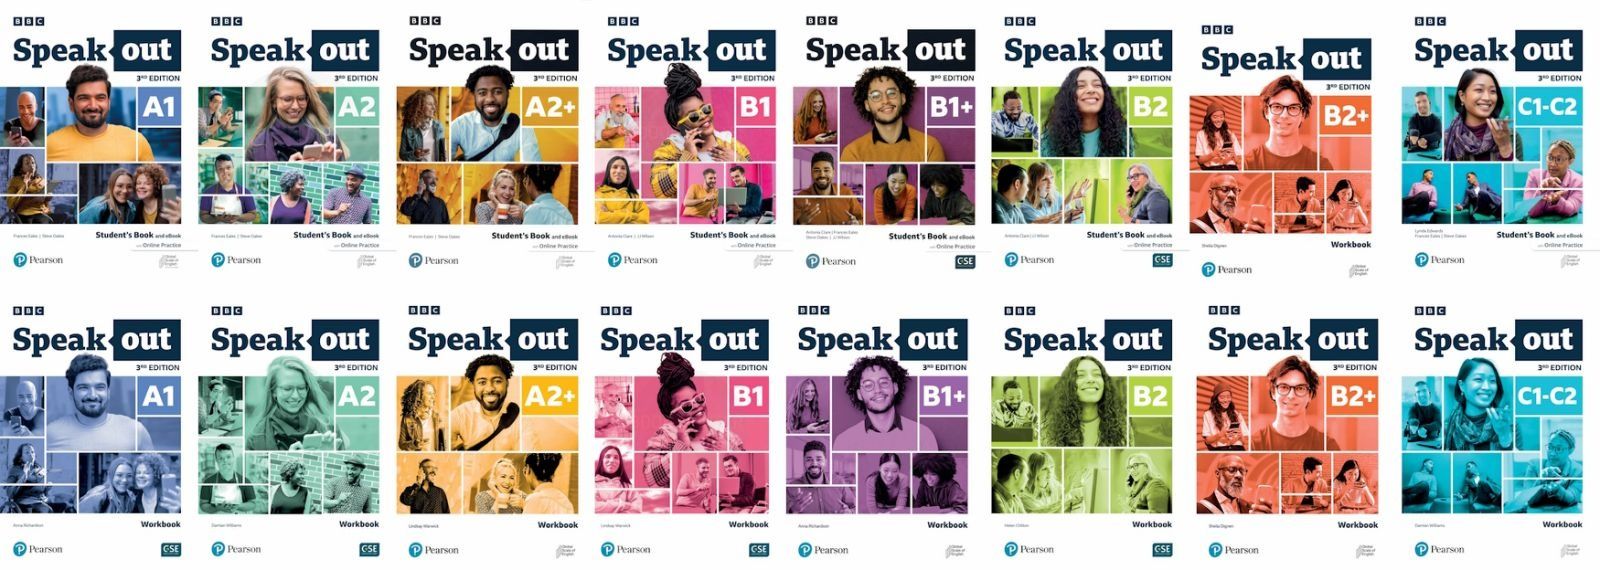 Speakout 3rd Edition